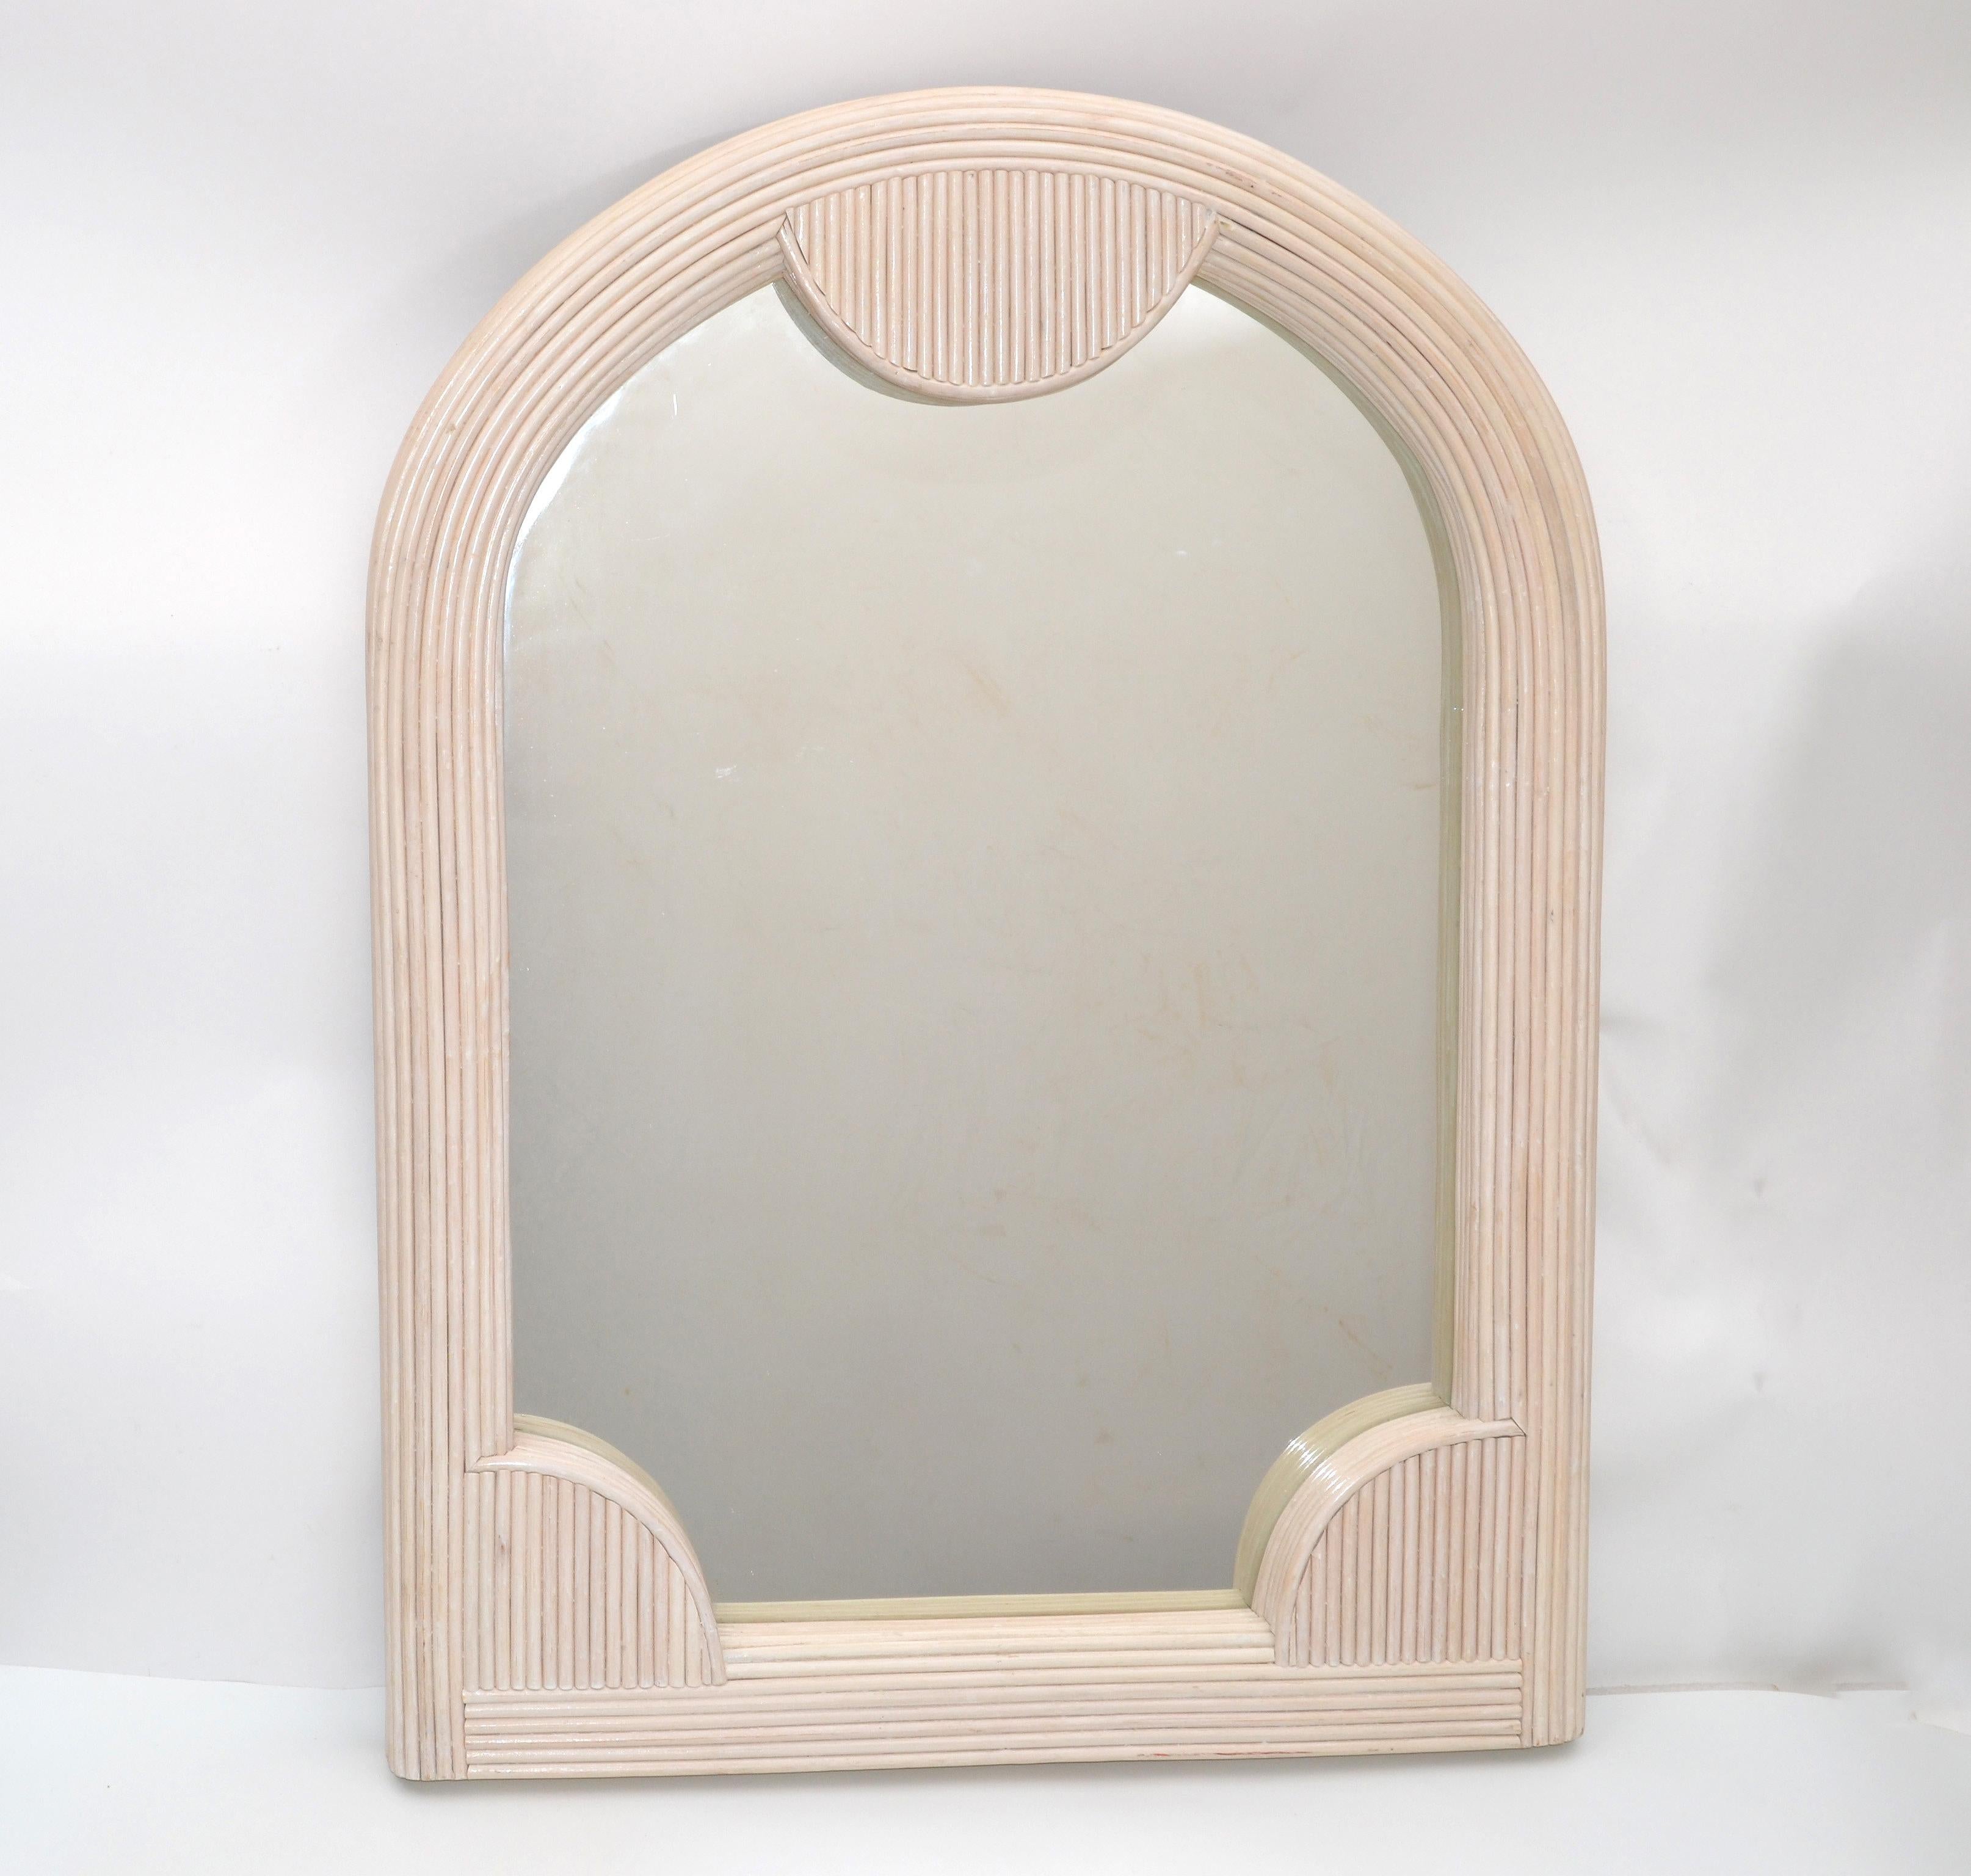 Bohemian style Mid-Century Modern arch shaped handmade white washed pencil reed wall mirror.
The mirror is woven with pencil reed and has wooden backing.
Great for the sunroom.
Mirror size: 29.5 x 23 inches.